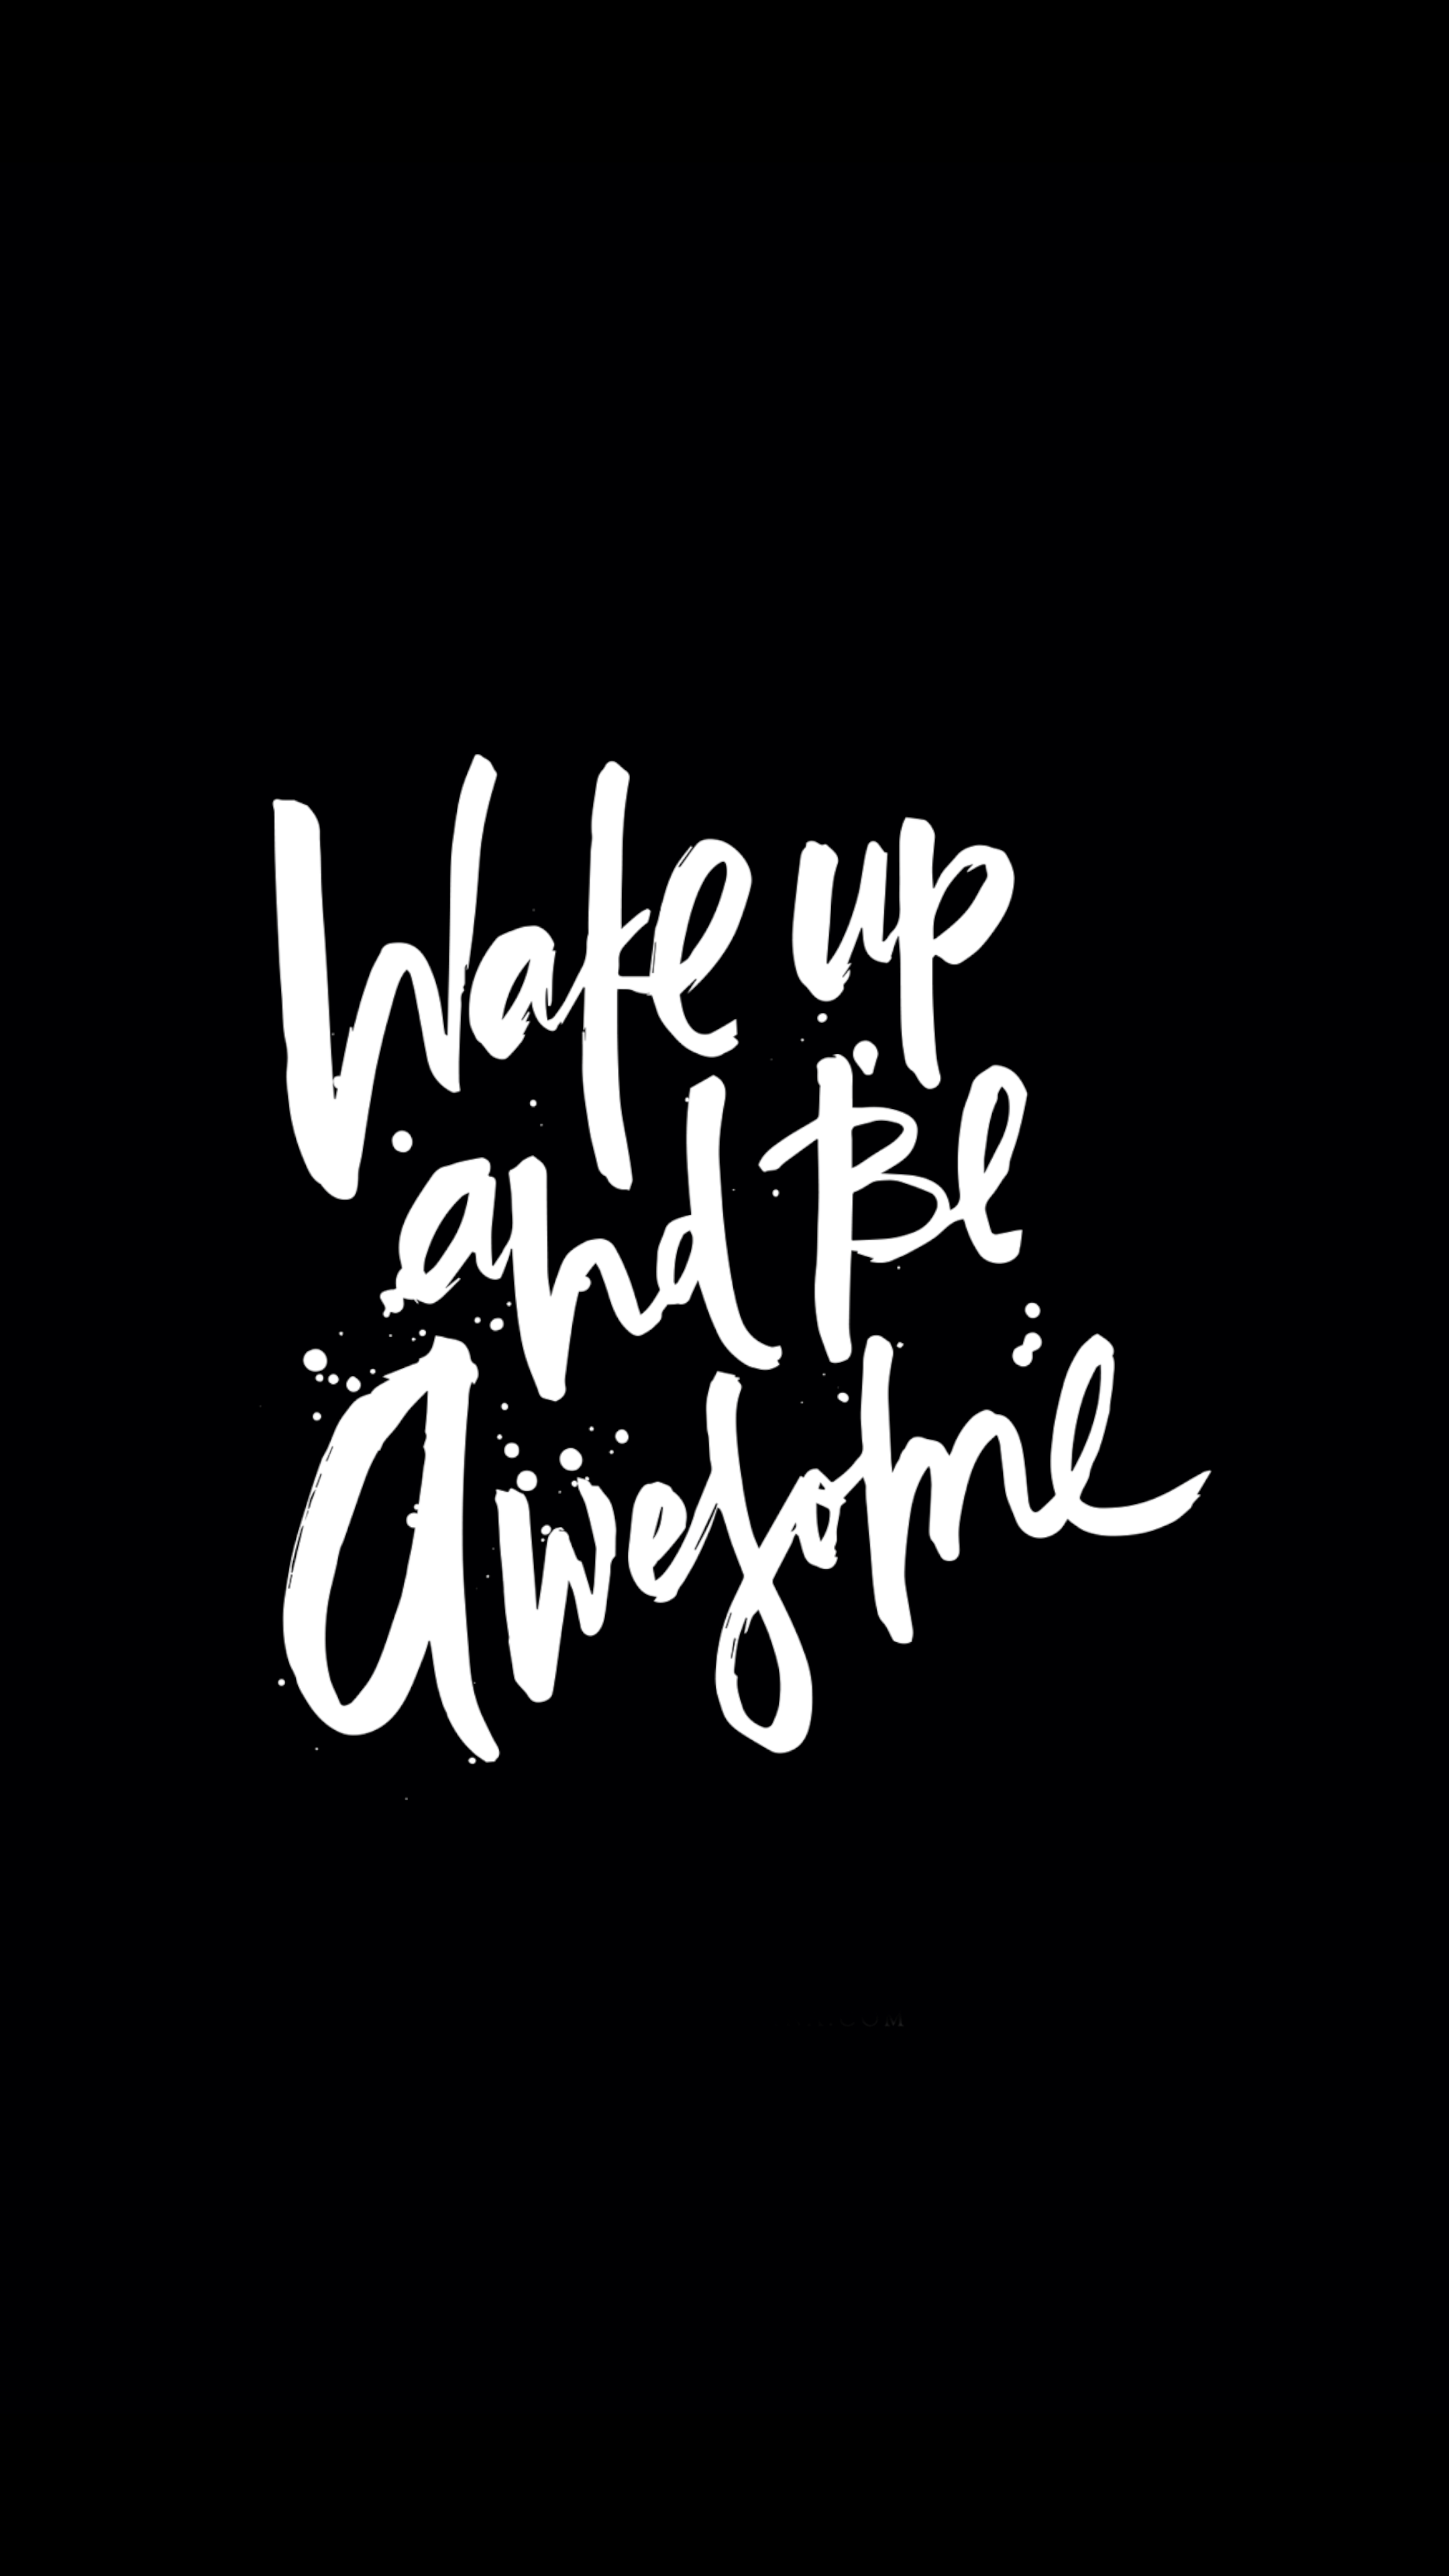 Wake up and be awesome mobile wallpaper [4k]